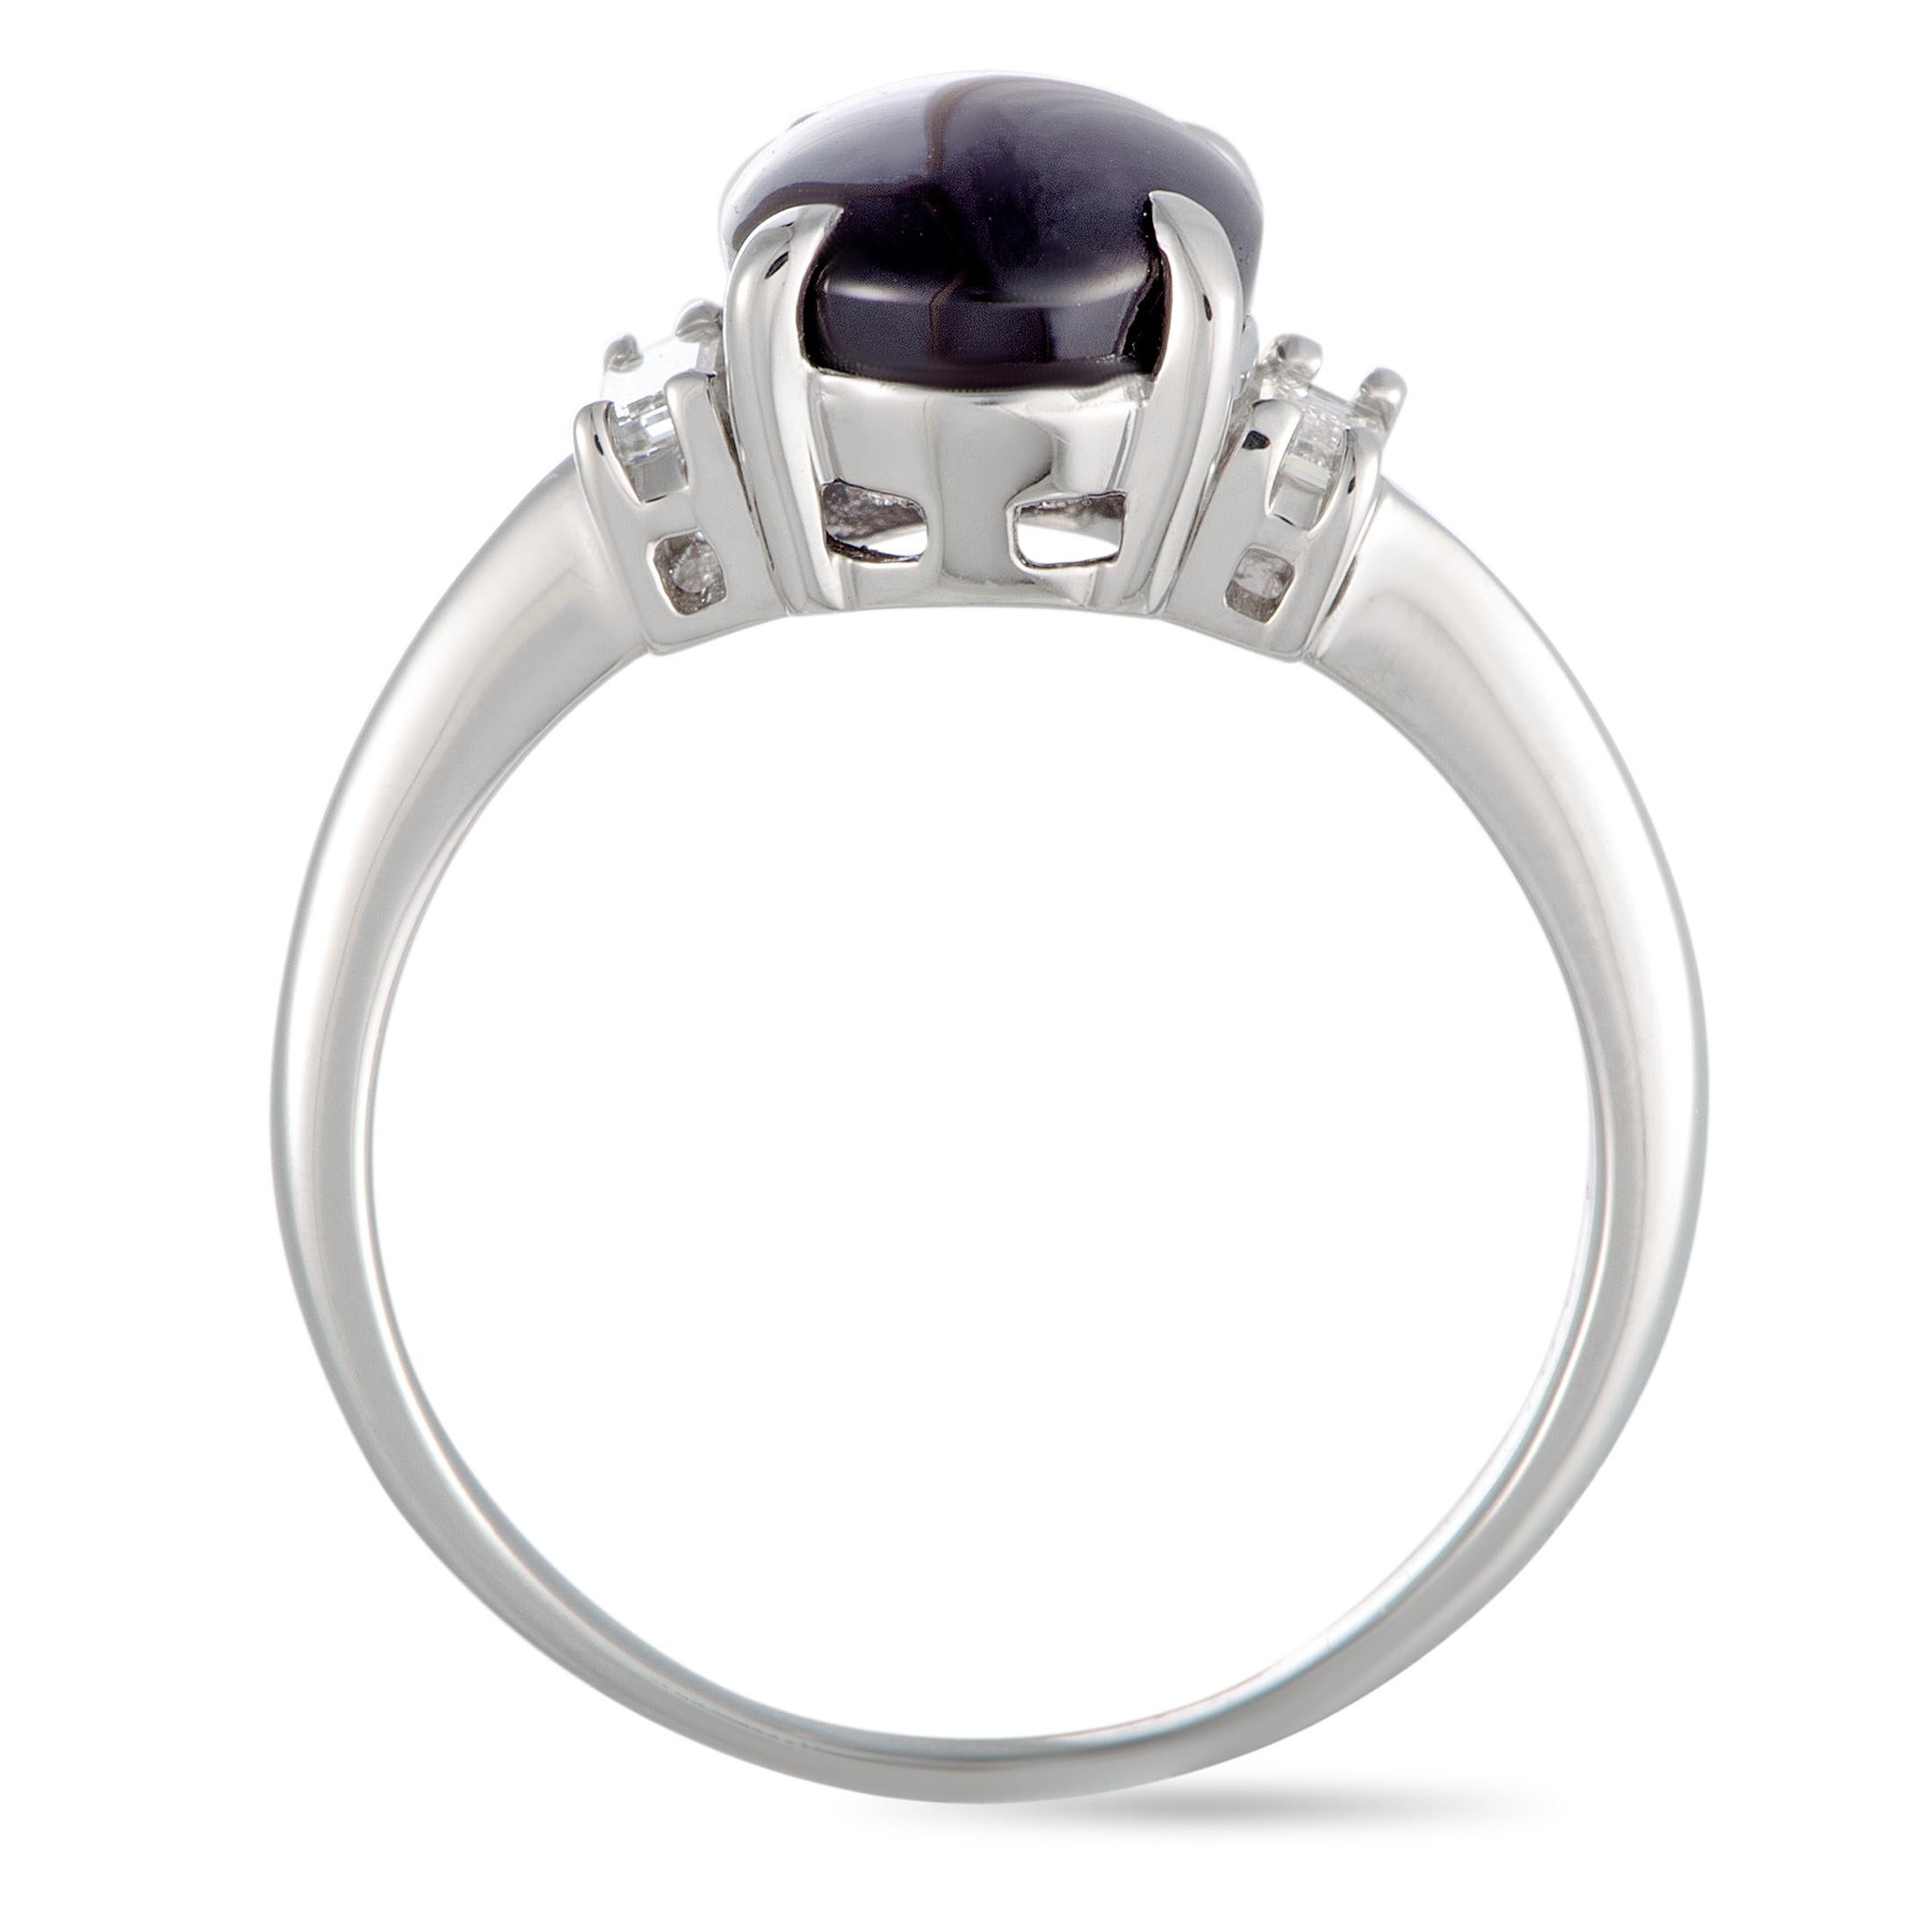 This ring is made of platinum and weighs 5.9 grams, boasting band thickness of 2 mm and top height of 6 mm, while top dimensions measure 10 by 12 mm. The ring is set with a purple sapphire that weighs 4.83 carats and with diamonds that total 0.24